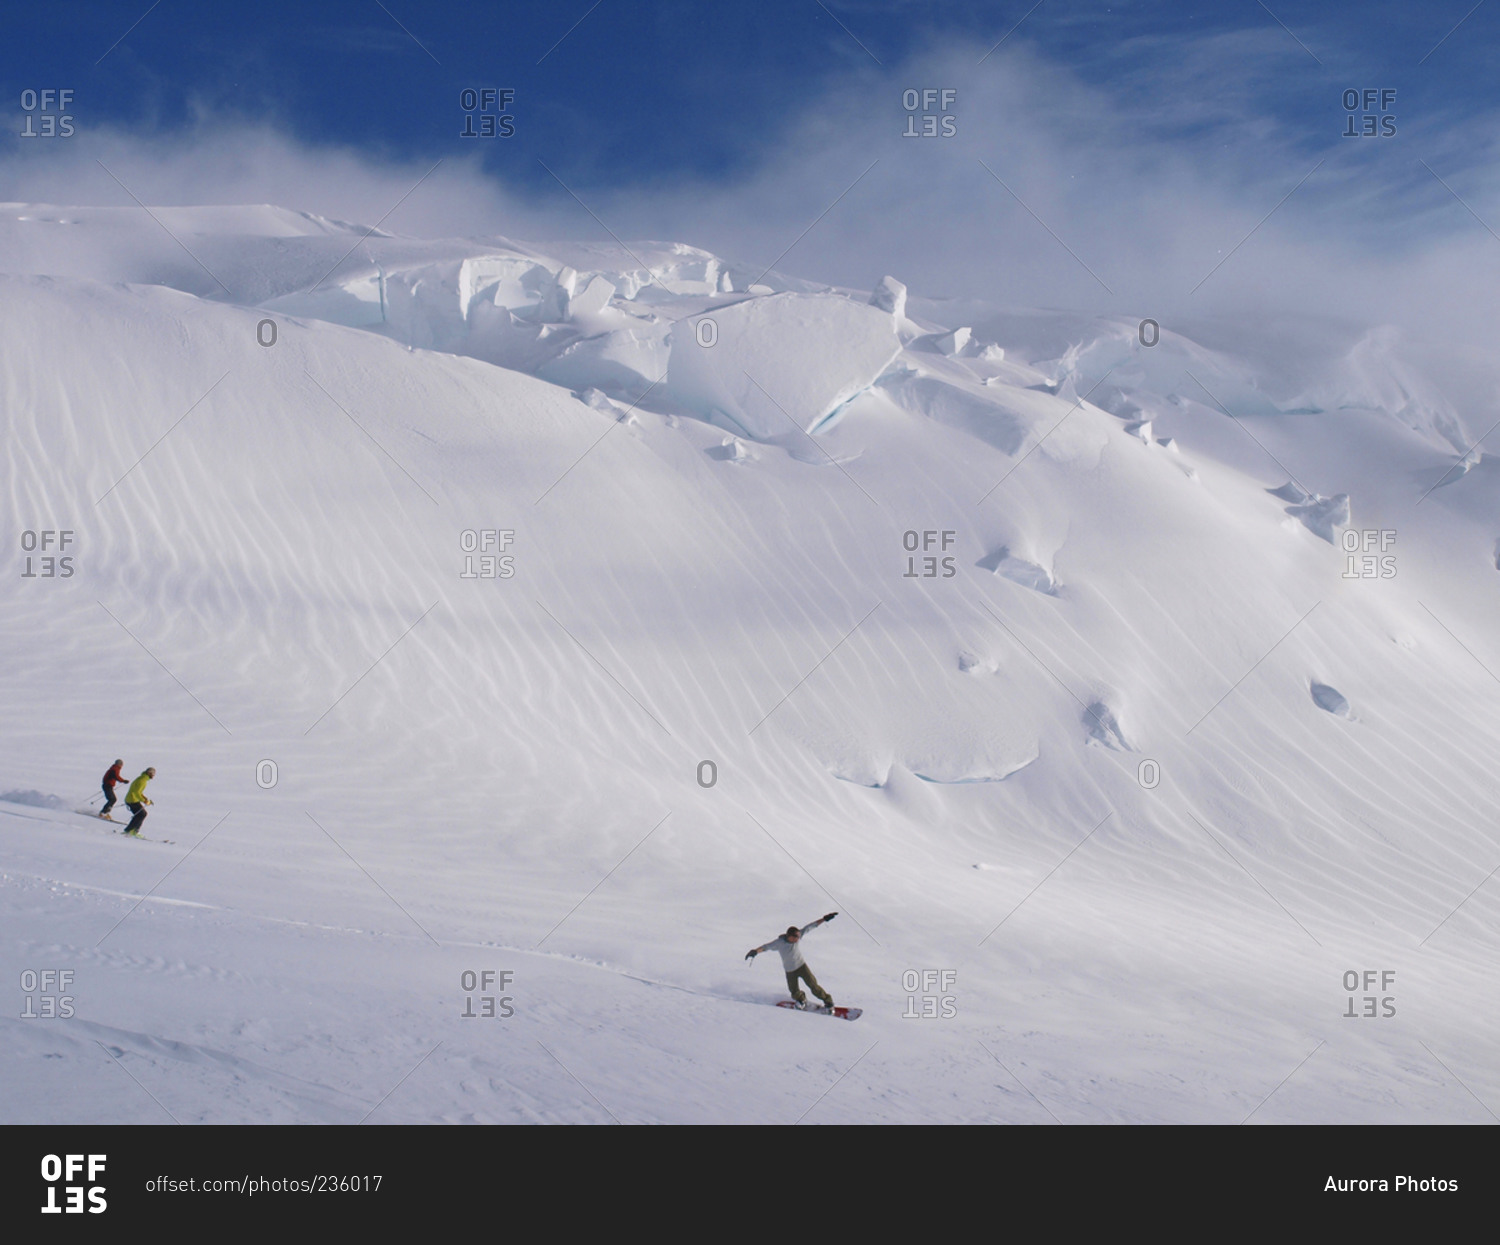 Mountaineers are skiing and snowboarding in the evening light, near 12000 feet camp on a glacier on Mount McKinley